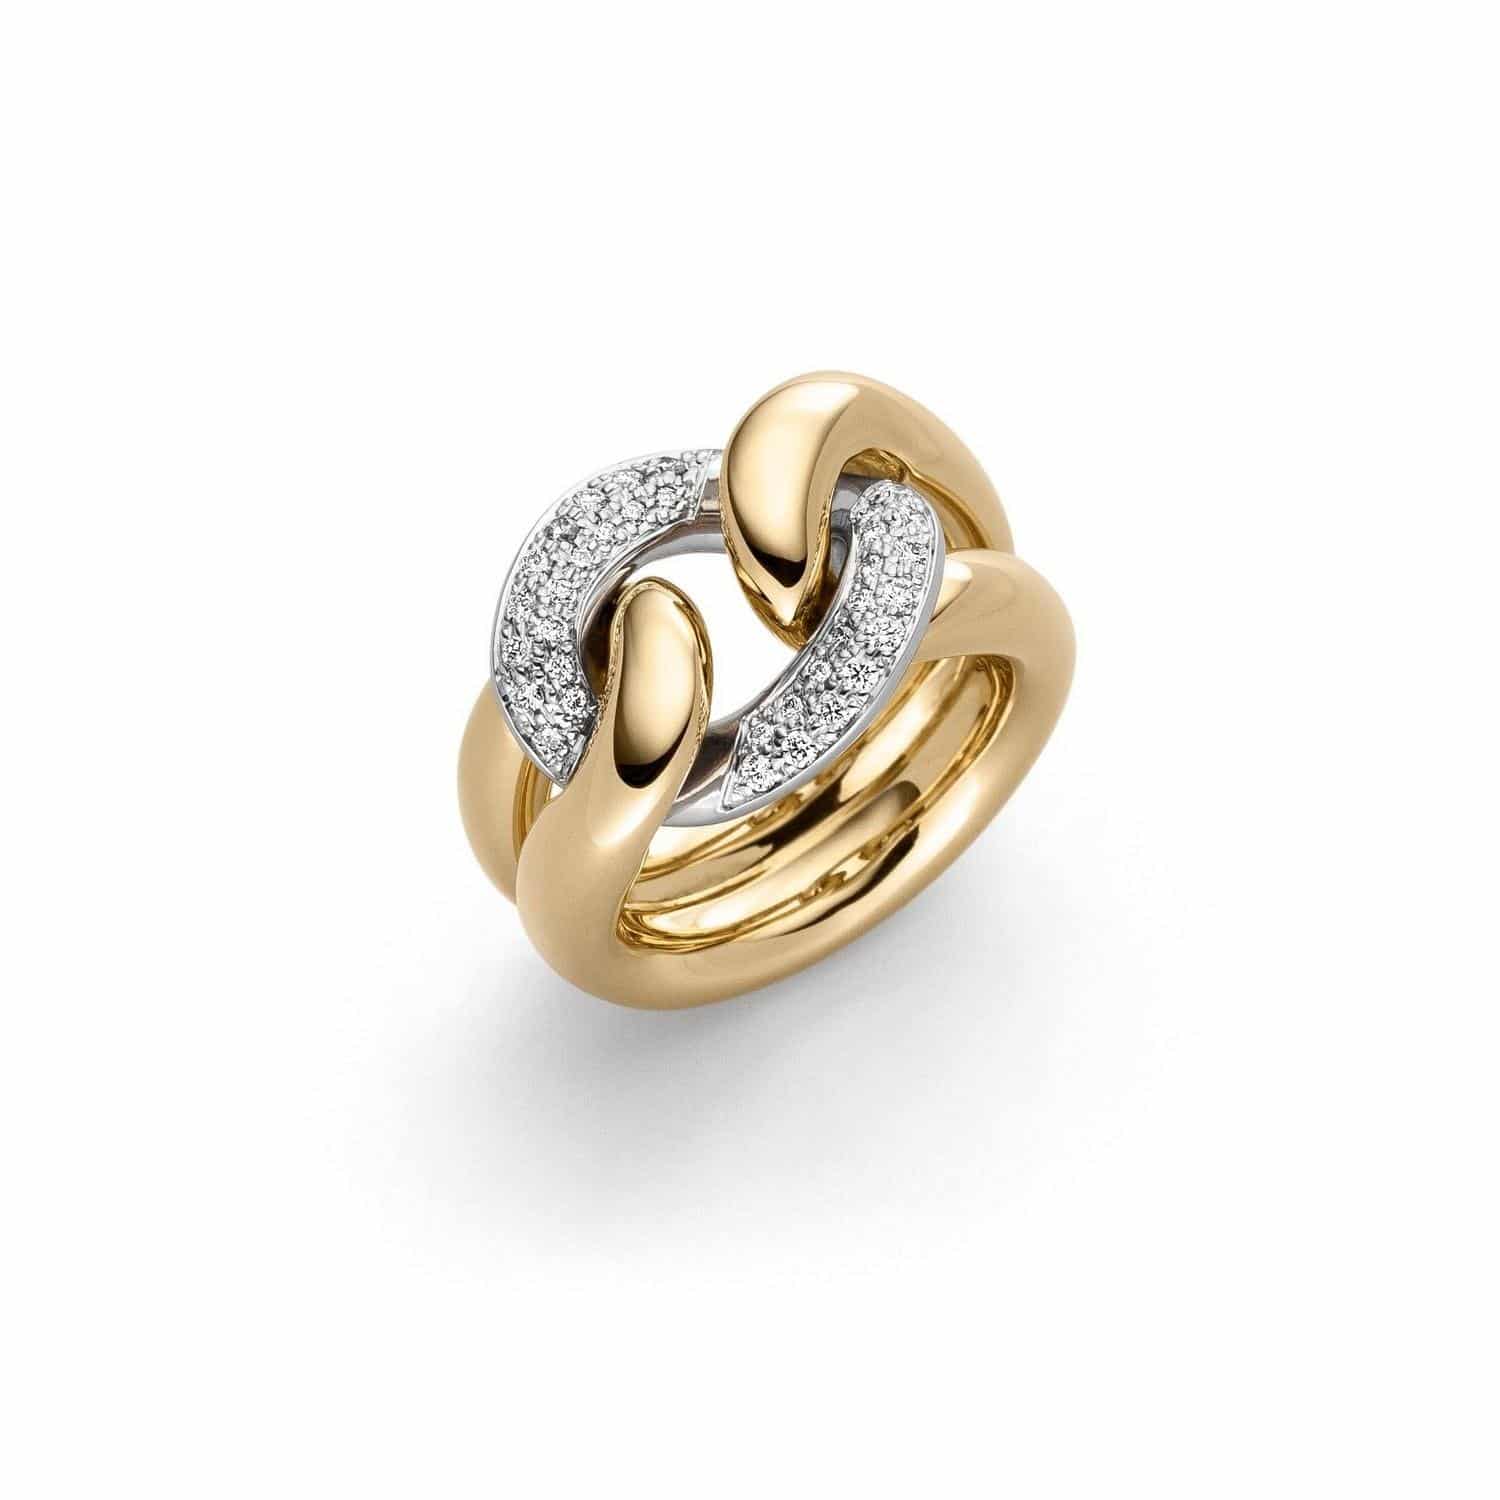 ISABELLE FA RING "DUCHESSE 15" PAVÉ - 13482-1B-RING-ROS